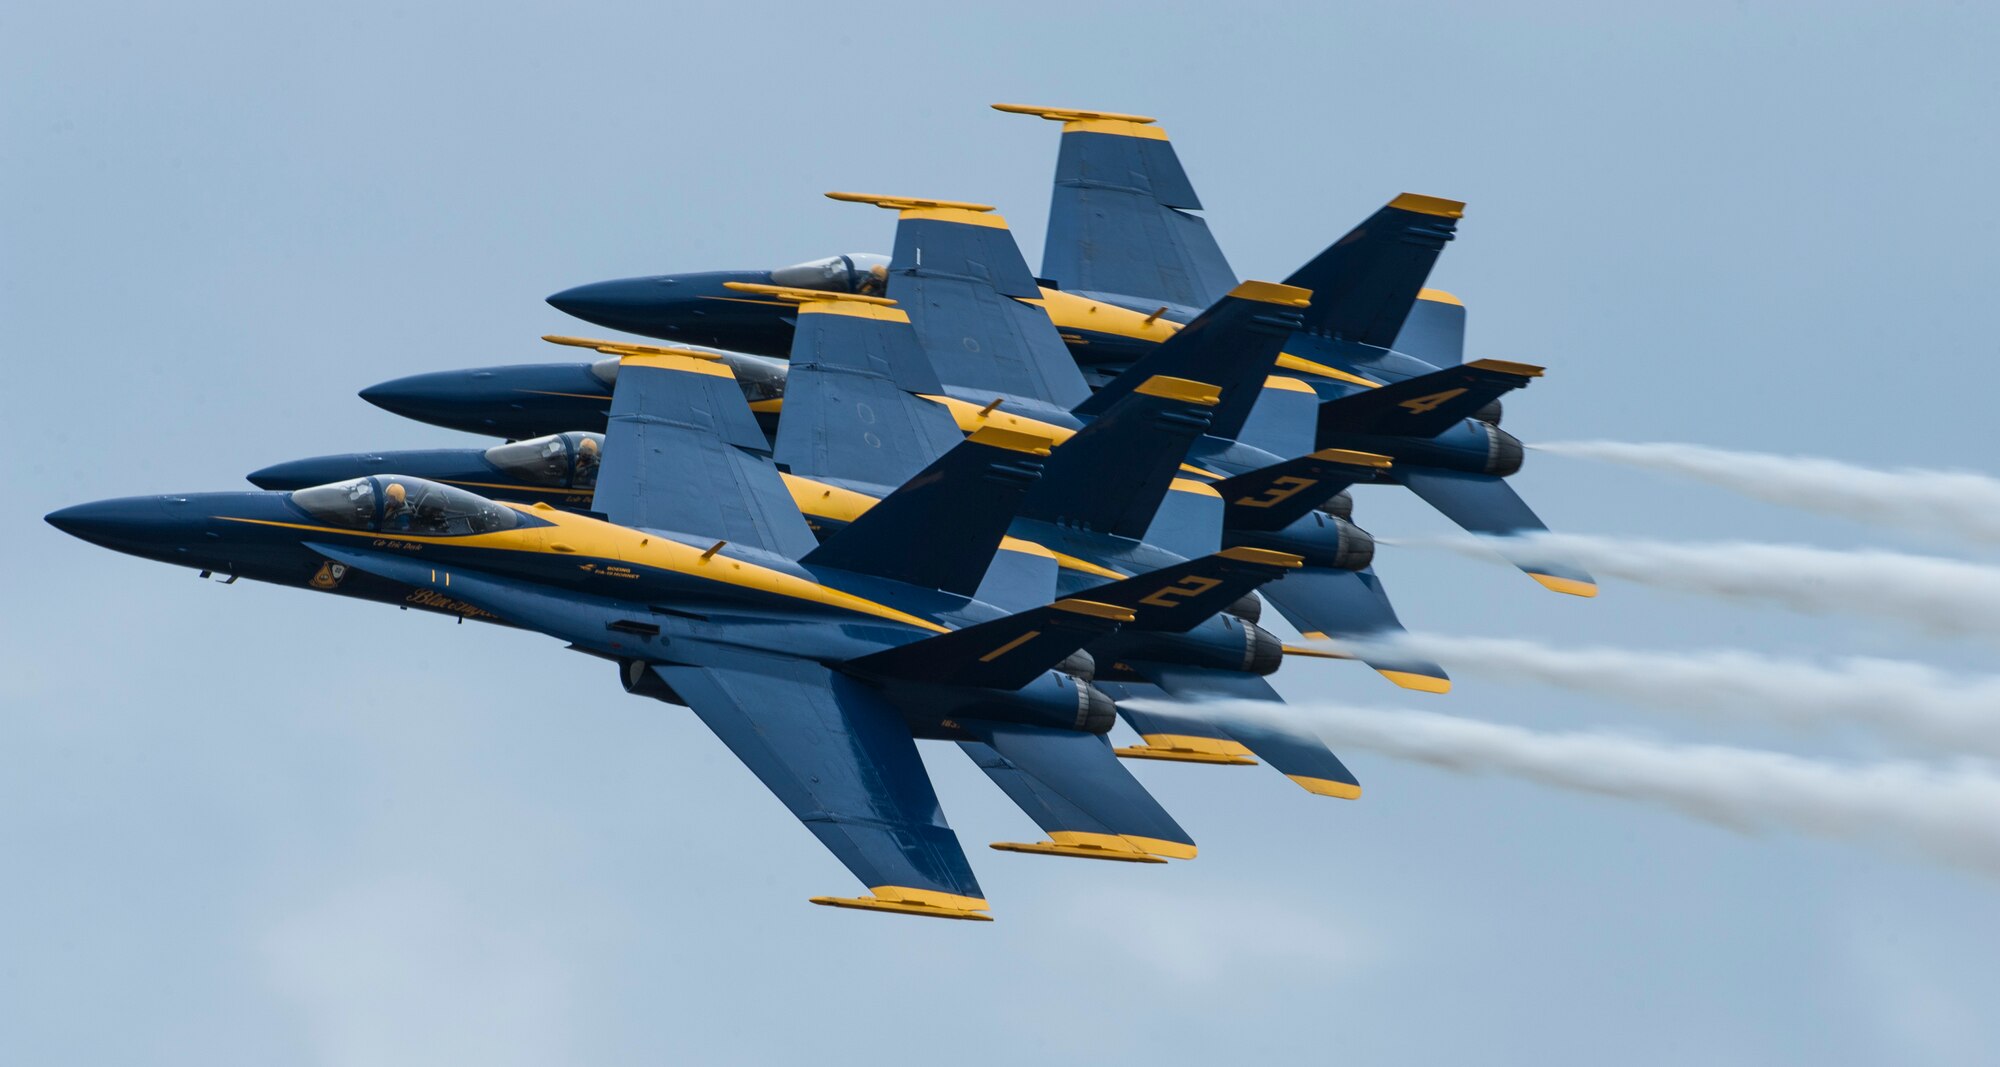 The U.S. Navy Flight Demonstration Squadron, the Blue Angels, fly in a right-echelon formation during their Tampa Bay AirFest 2018 performance at MacDill Air Force Base, Fla., May 13, 2018.